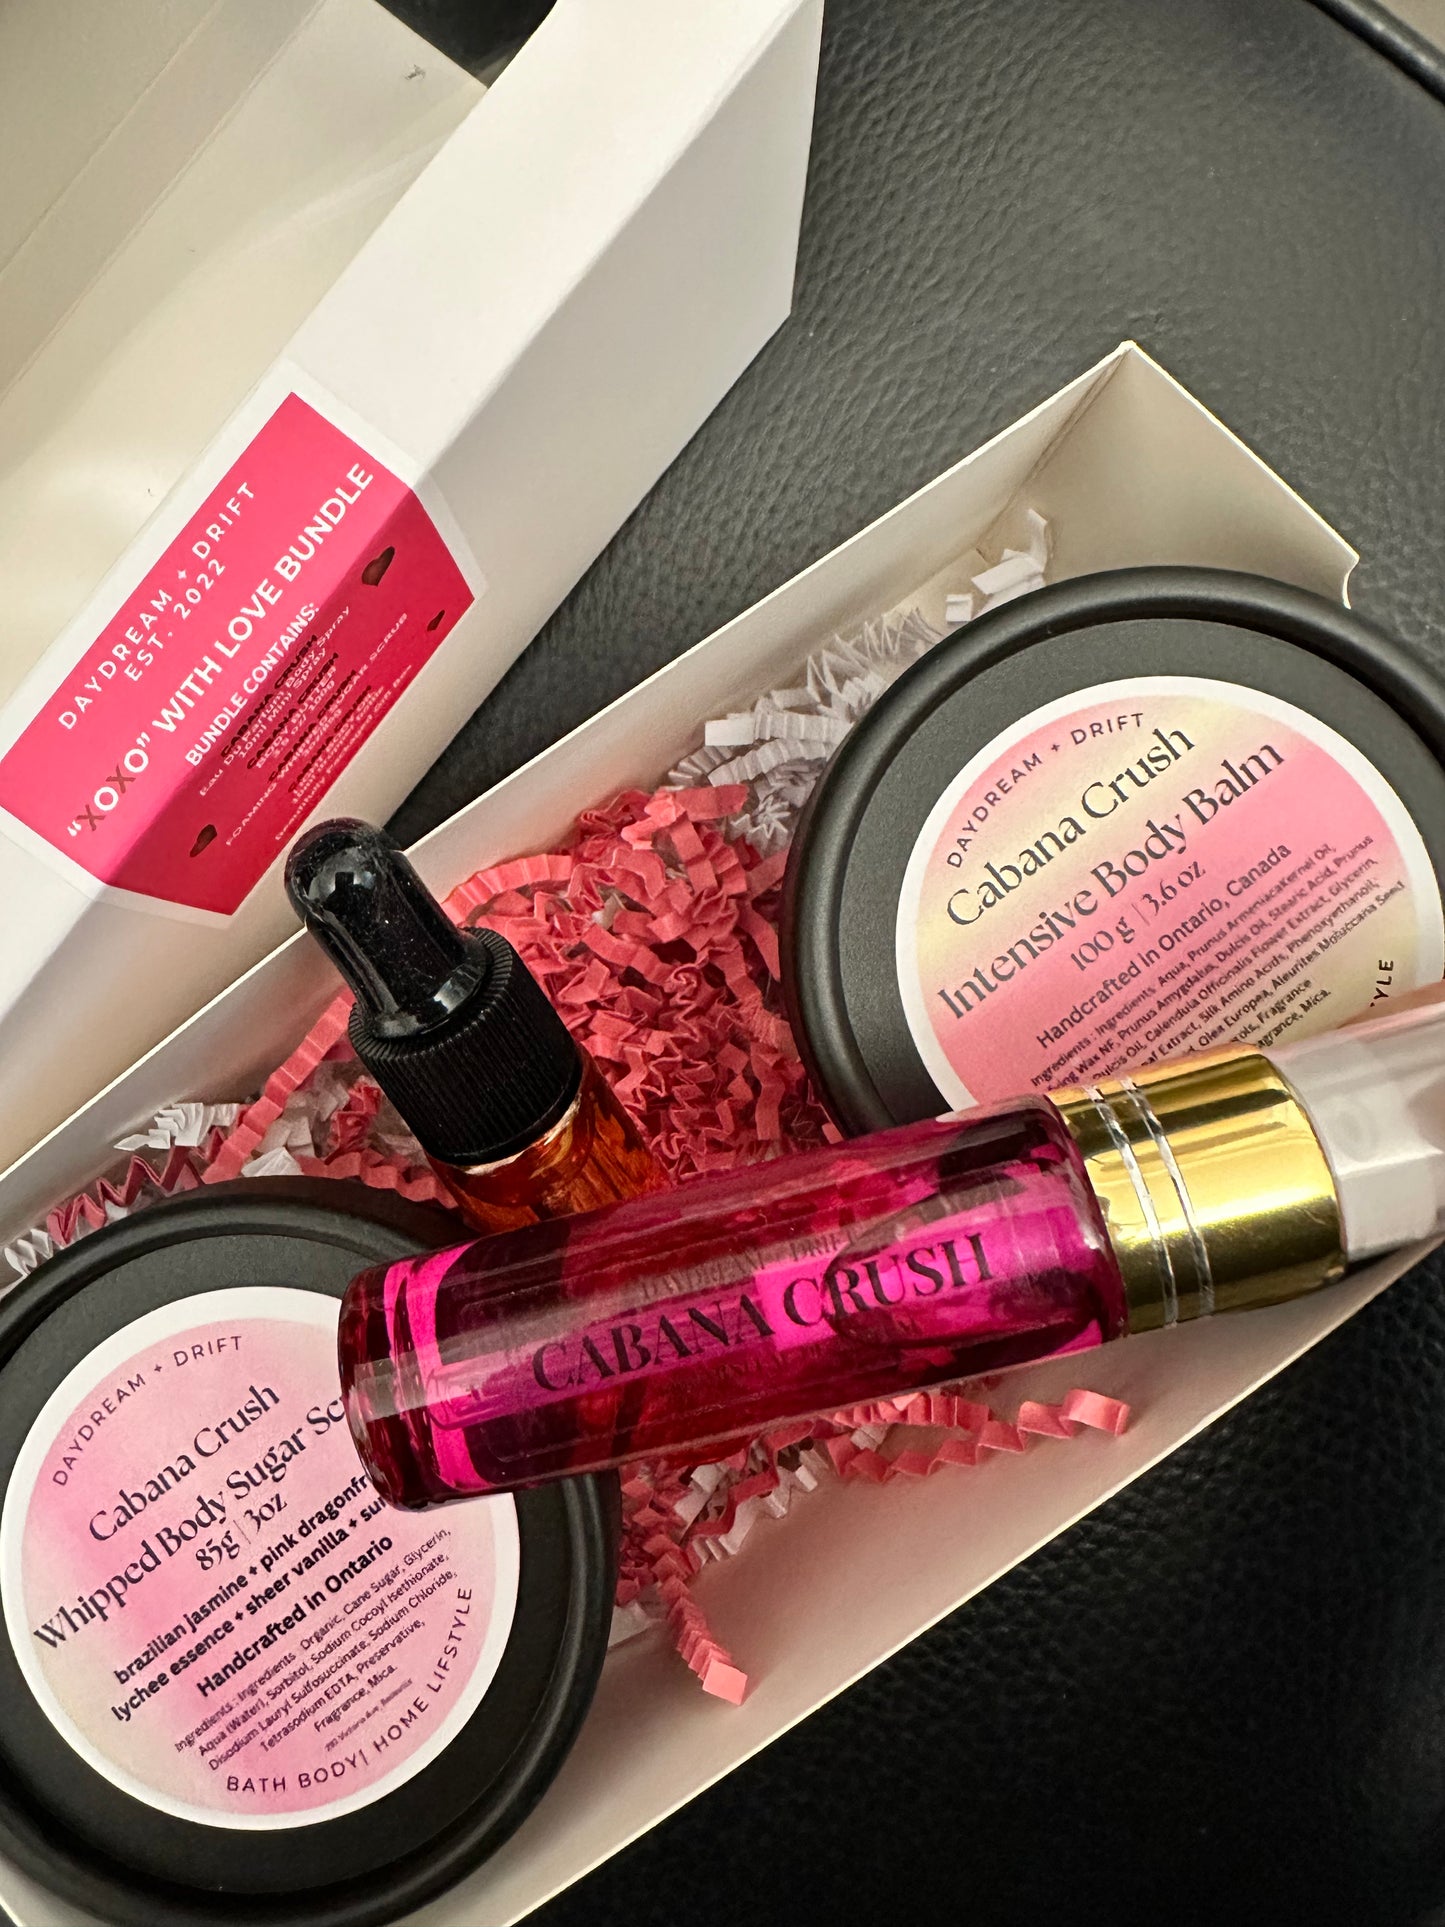 XO With Love Body Care Bundle Scented in Cabana Crush